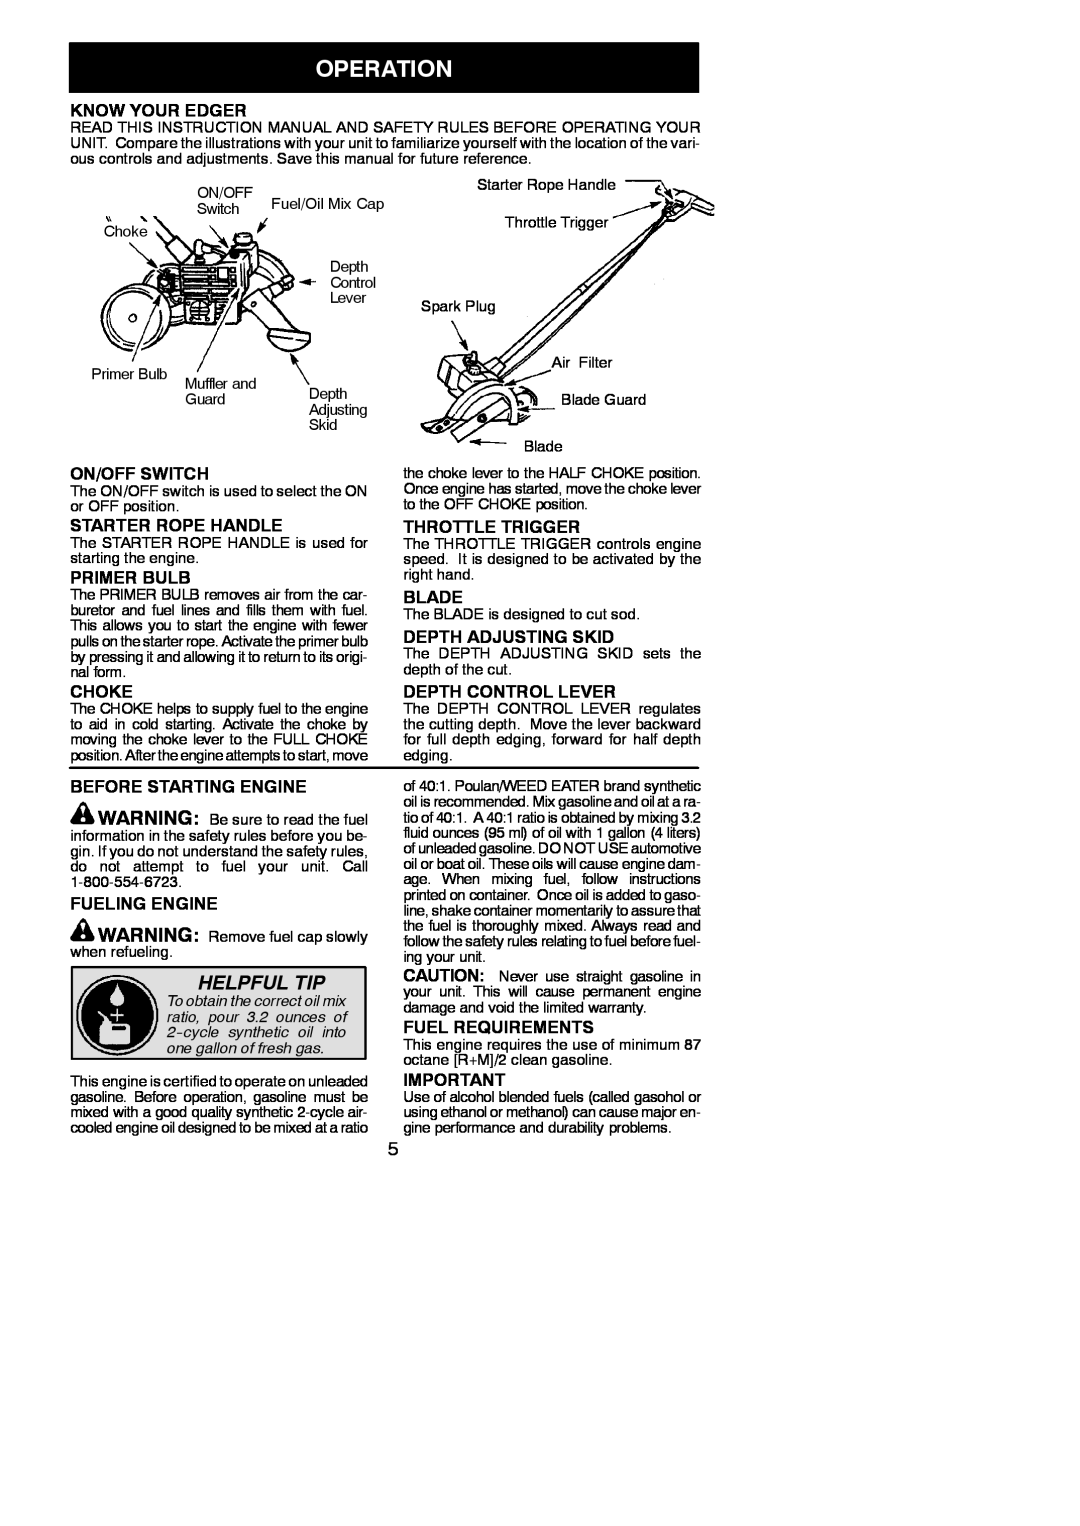 Weed Eater 545186731 Operation, Helpful Tip, Know Your Edger, On/Off Switch, Starter Rope Handle, Primer Bulb, Blade 